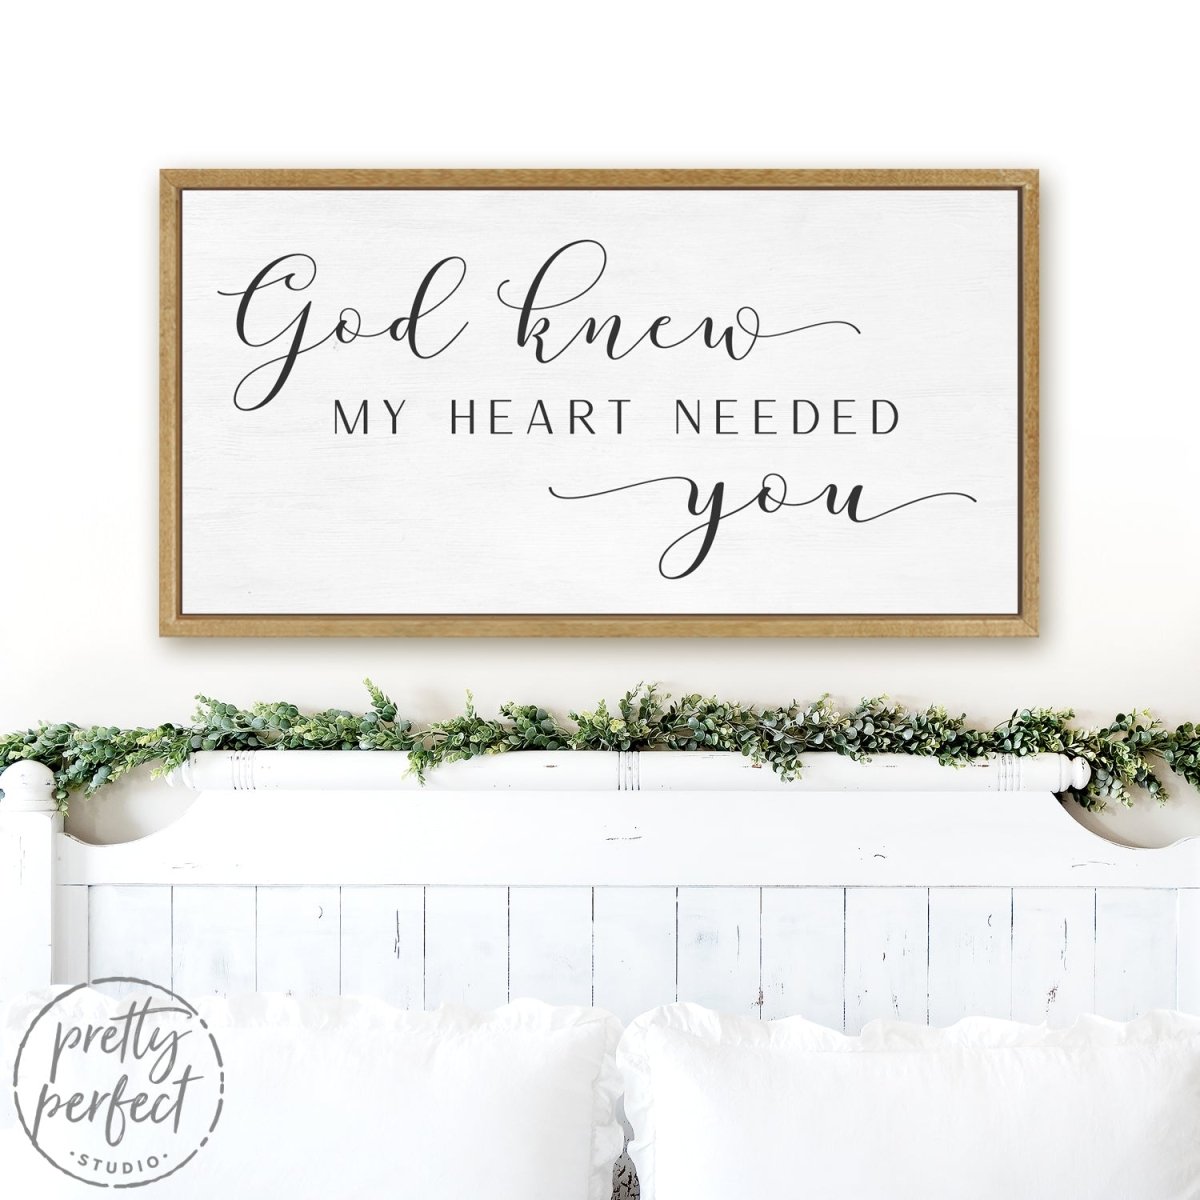 God Knew My Heart Needed You Sign Hanging in Living Room - Pretty Perfect Studio